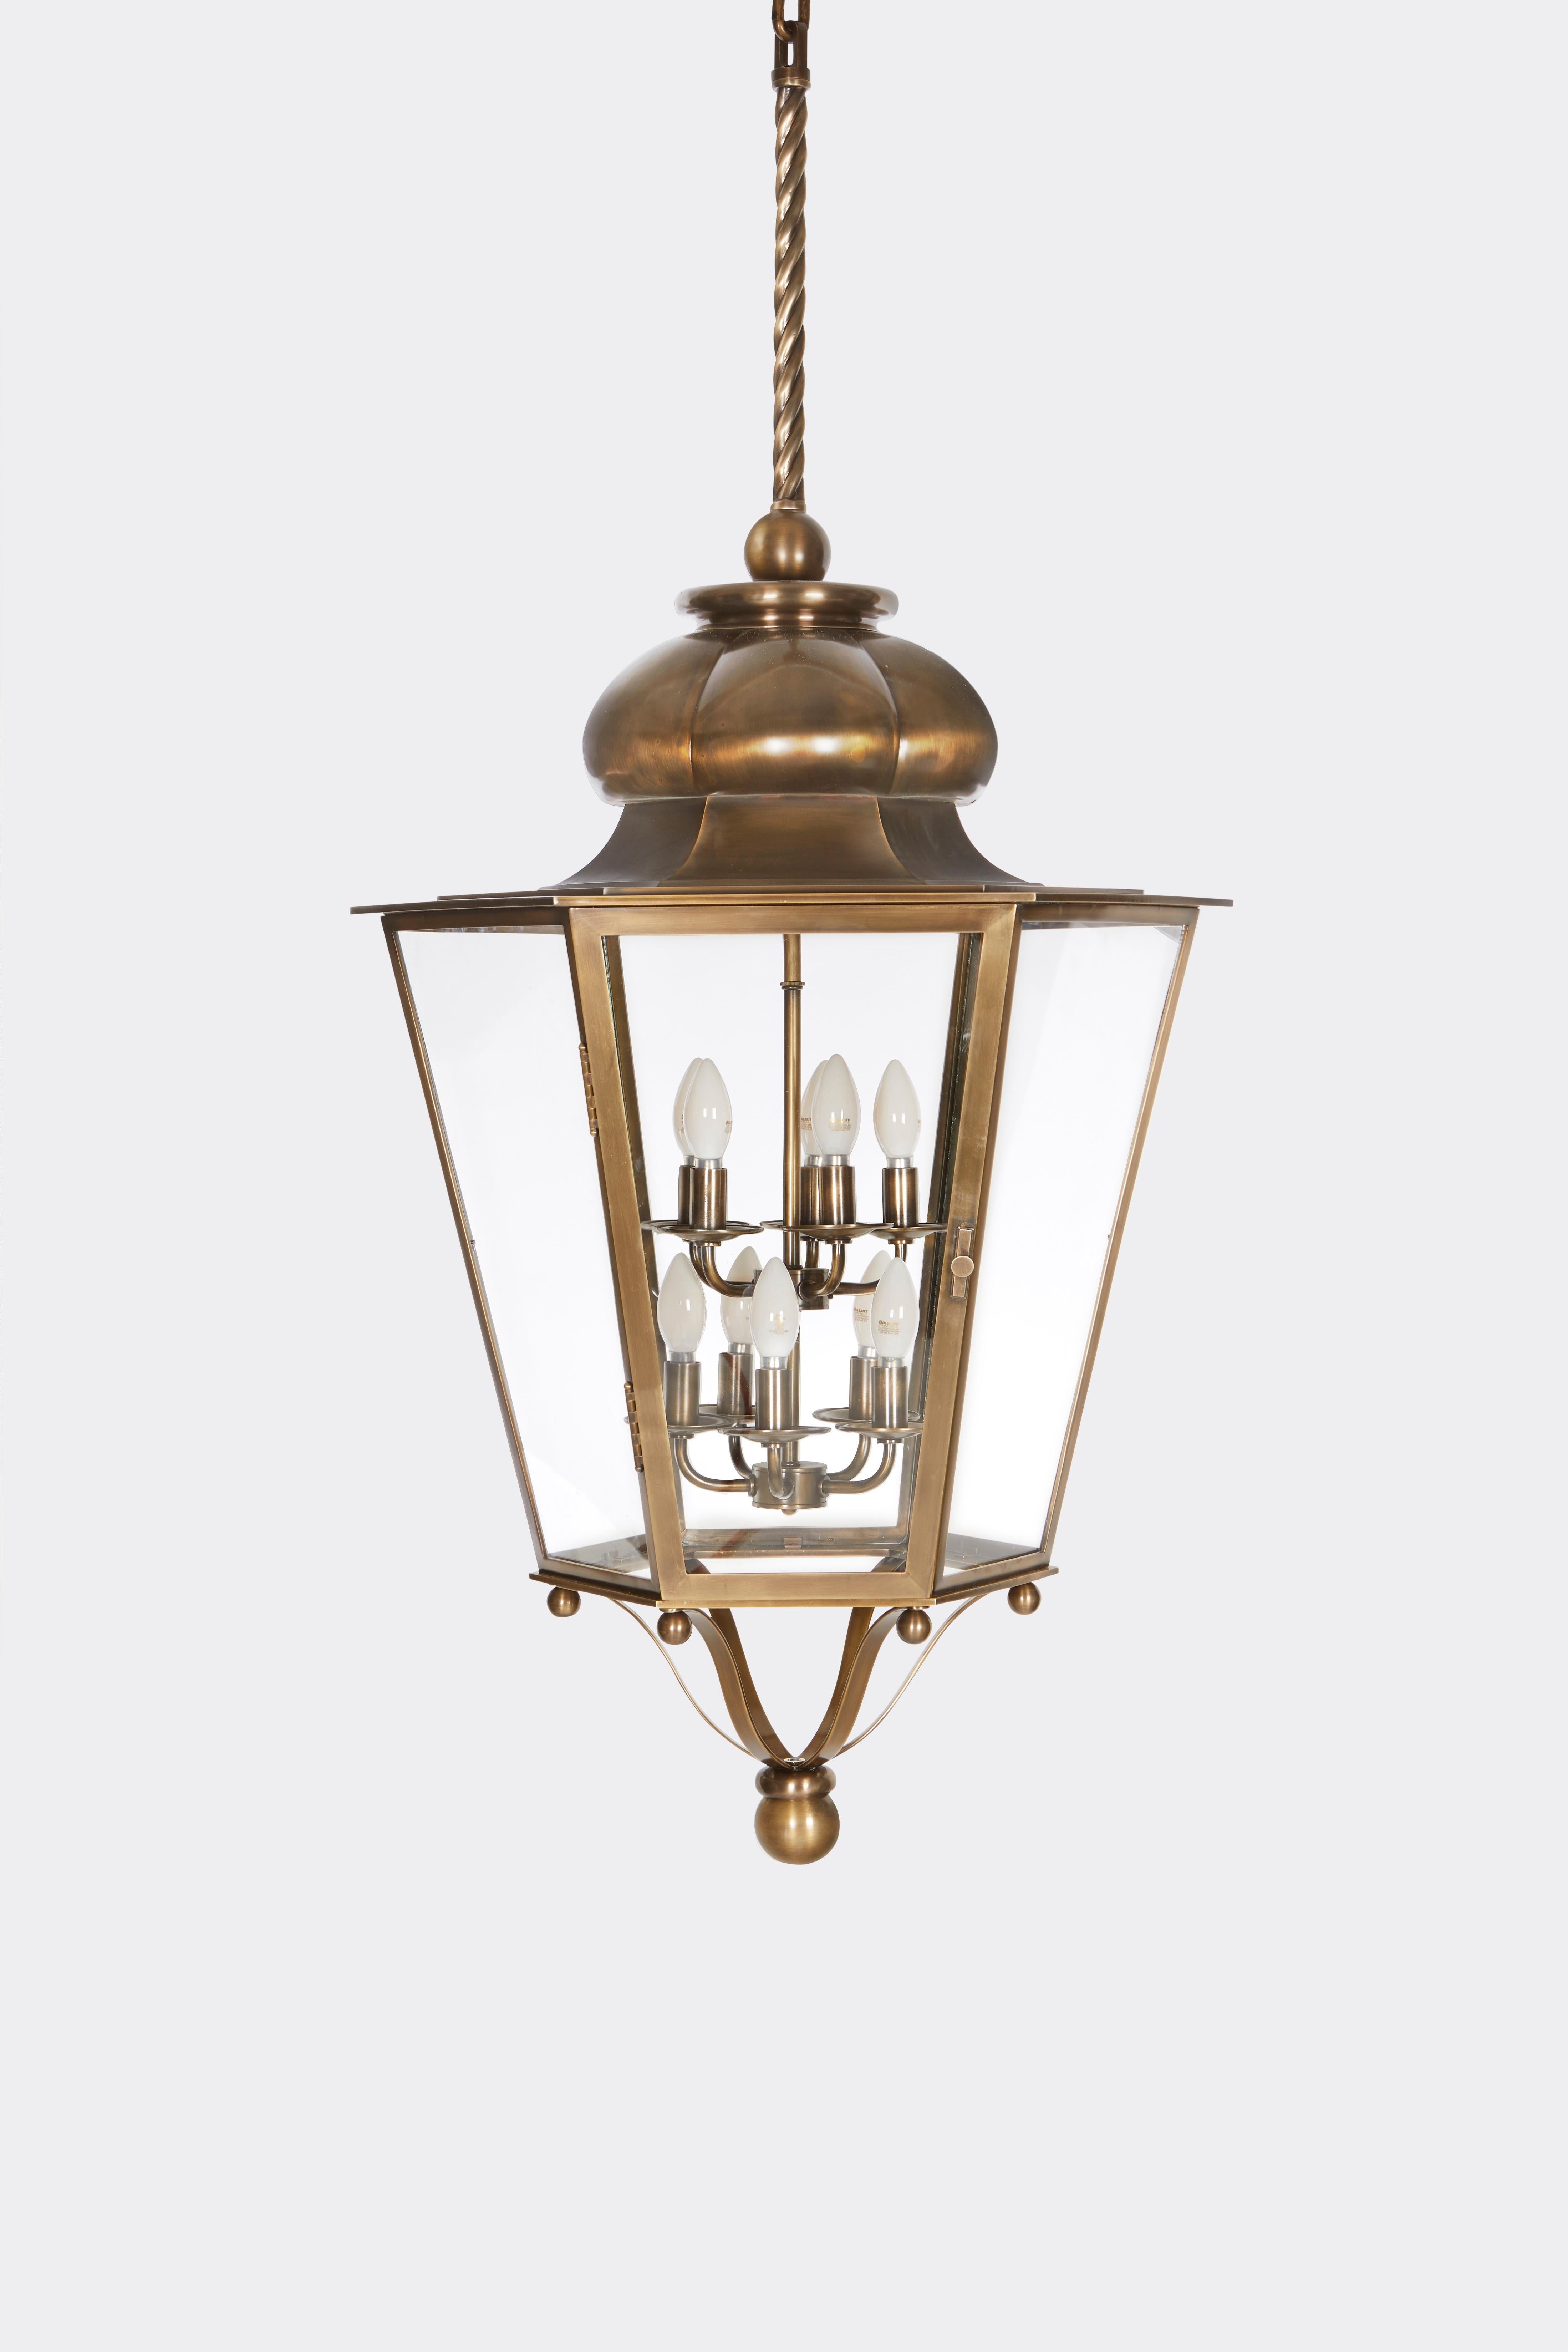 A Brass Georgian Styled Lantern made by David Duncan Studio. This fixture is suspended from a chain and canopy with an intricate rope-like design. Consists of 10 sockets with a maximum wattage of 100W each. 

This fixture is available in custom